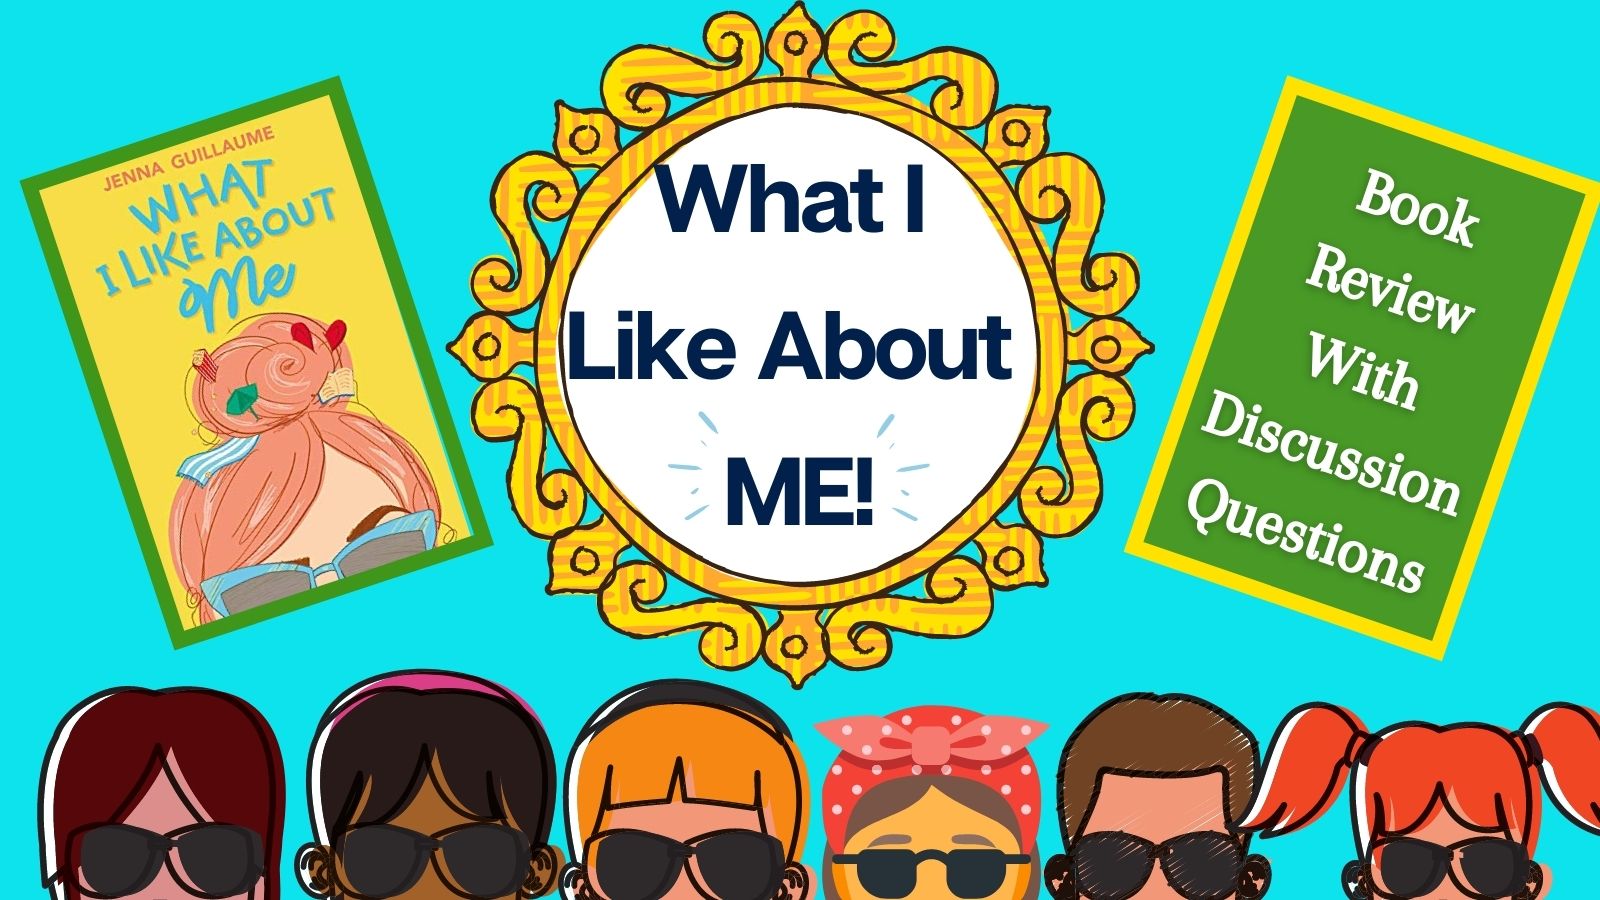 What I Like About Me Discussion Questions, What I Like About Me Book by Guillaume